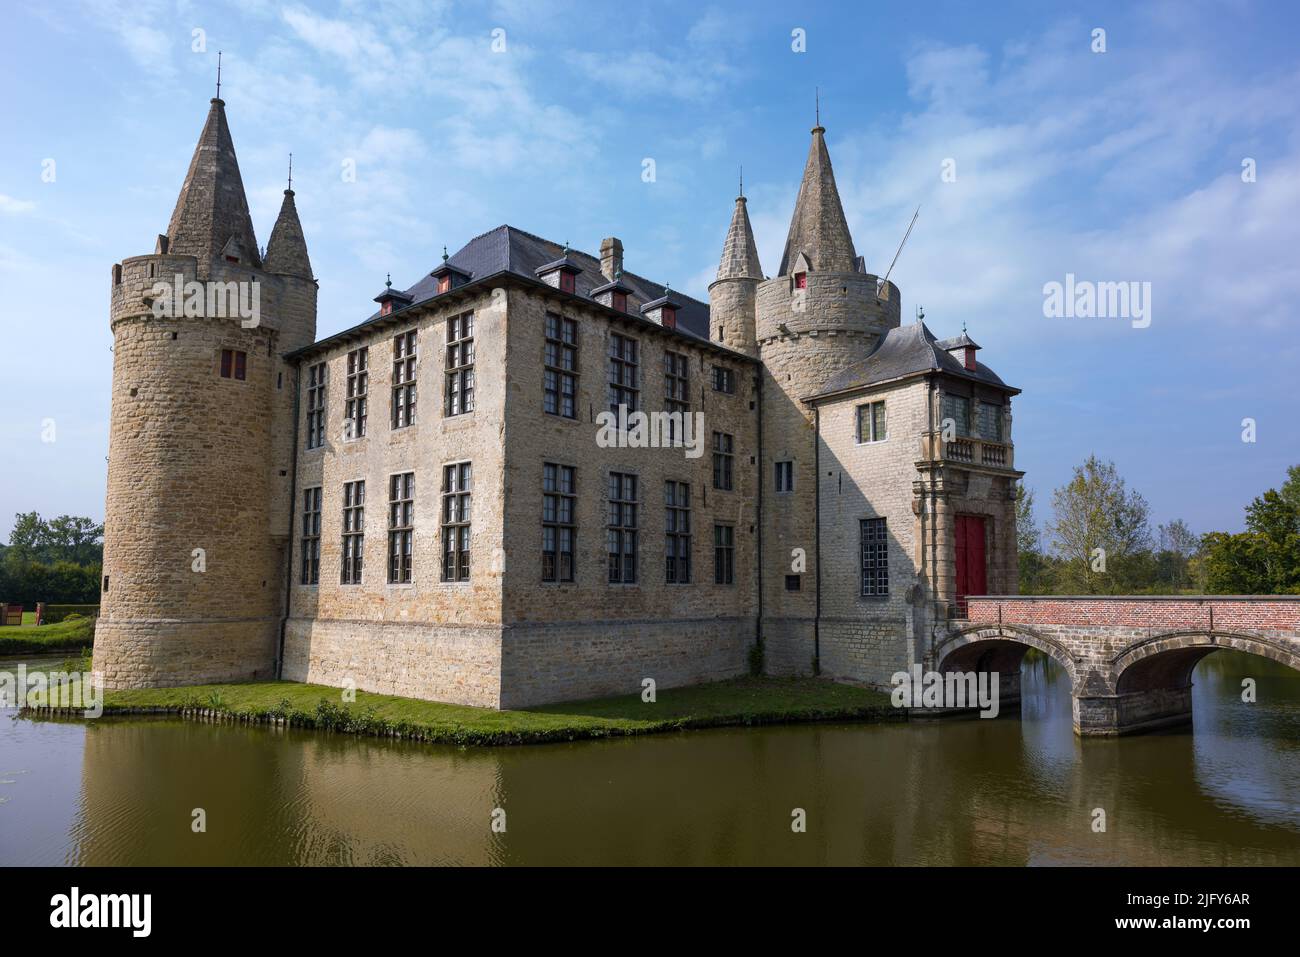 Exterior view of a 14th century medieval castle in the Flemish region of Belgium Stock Photo